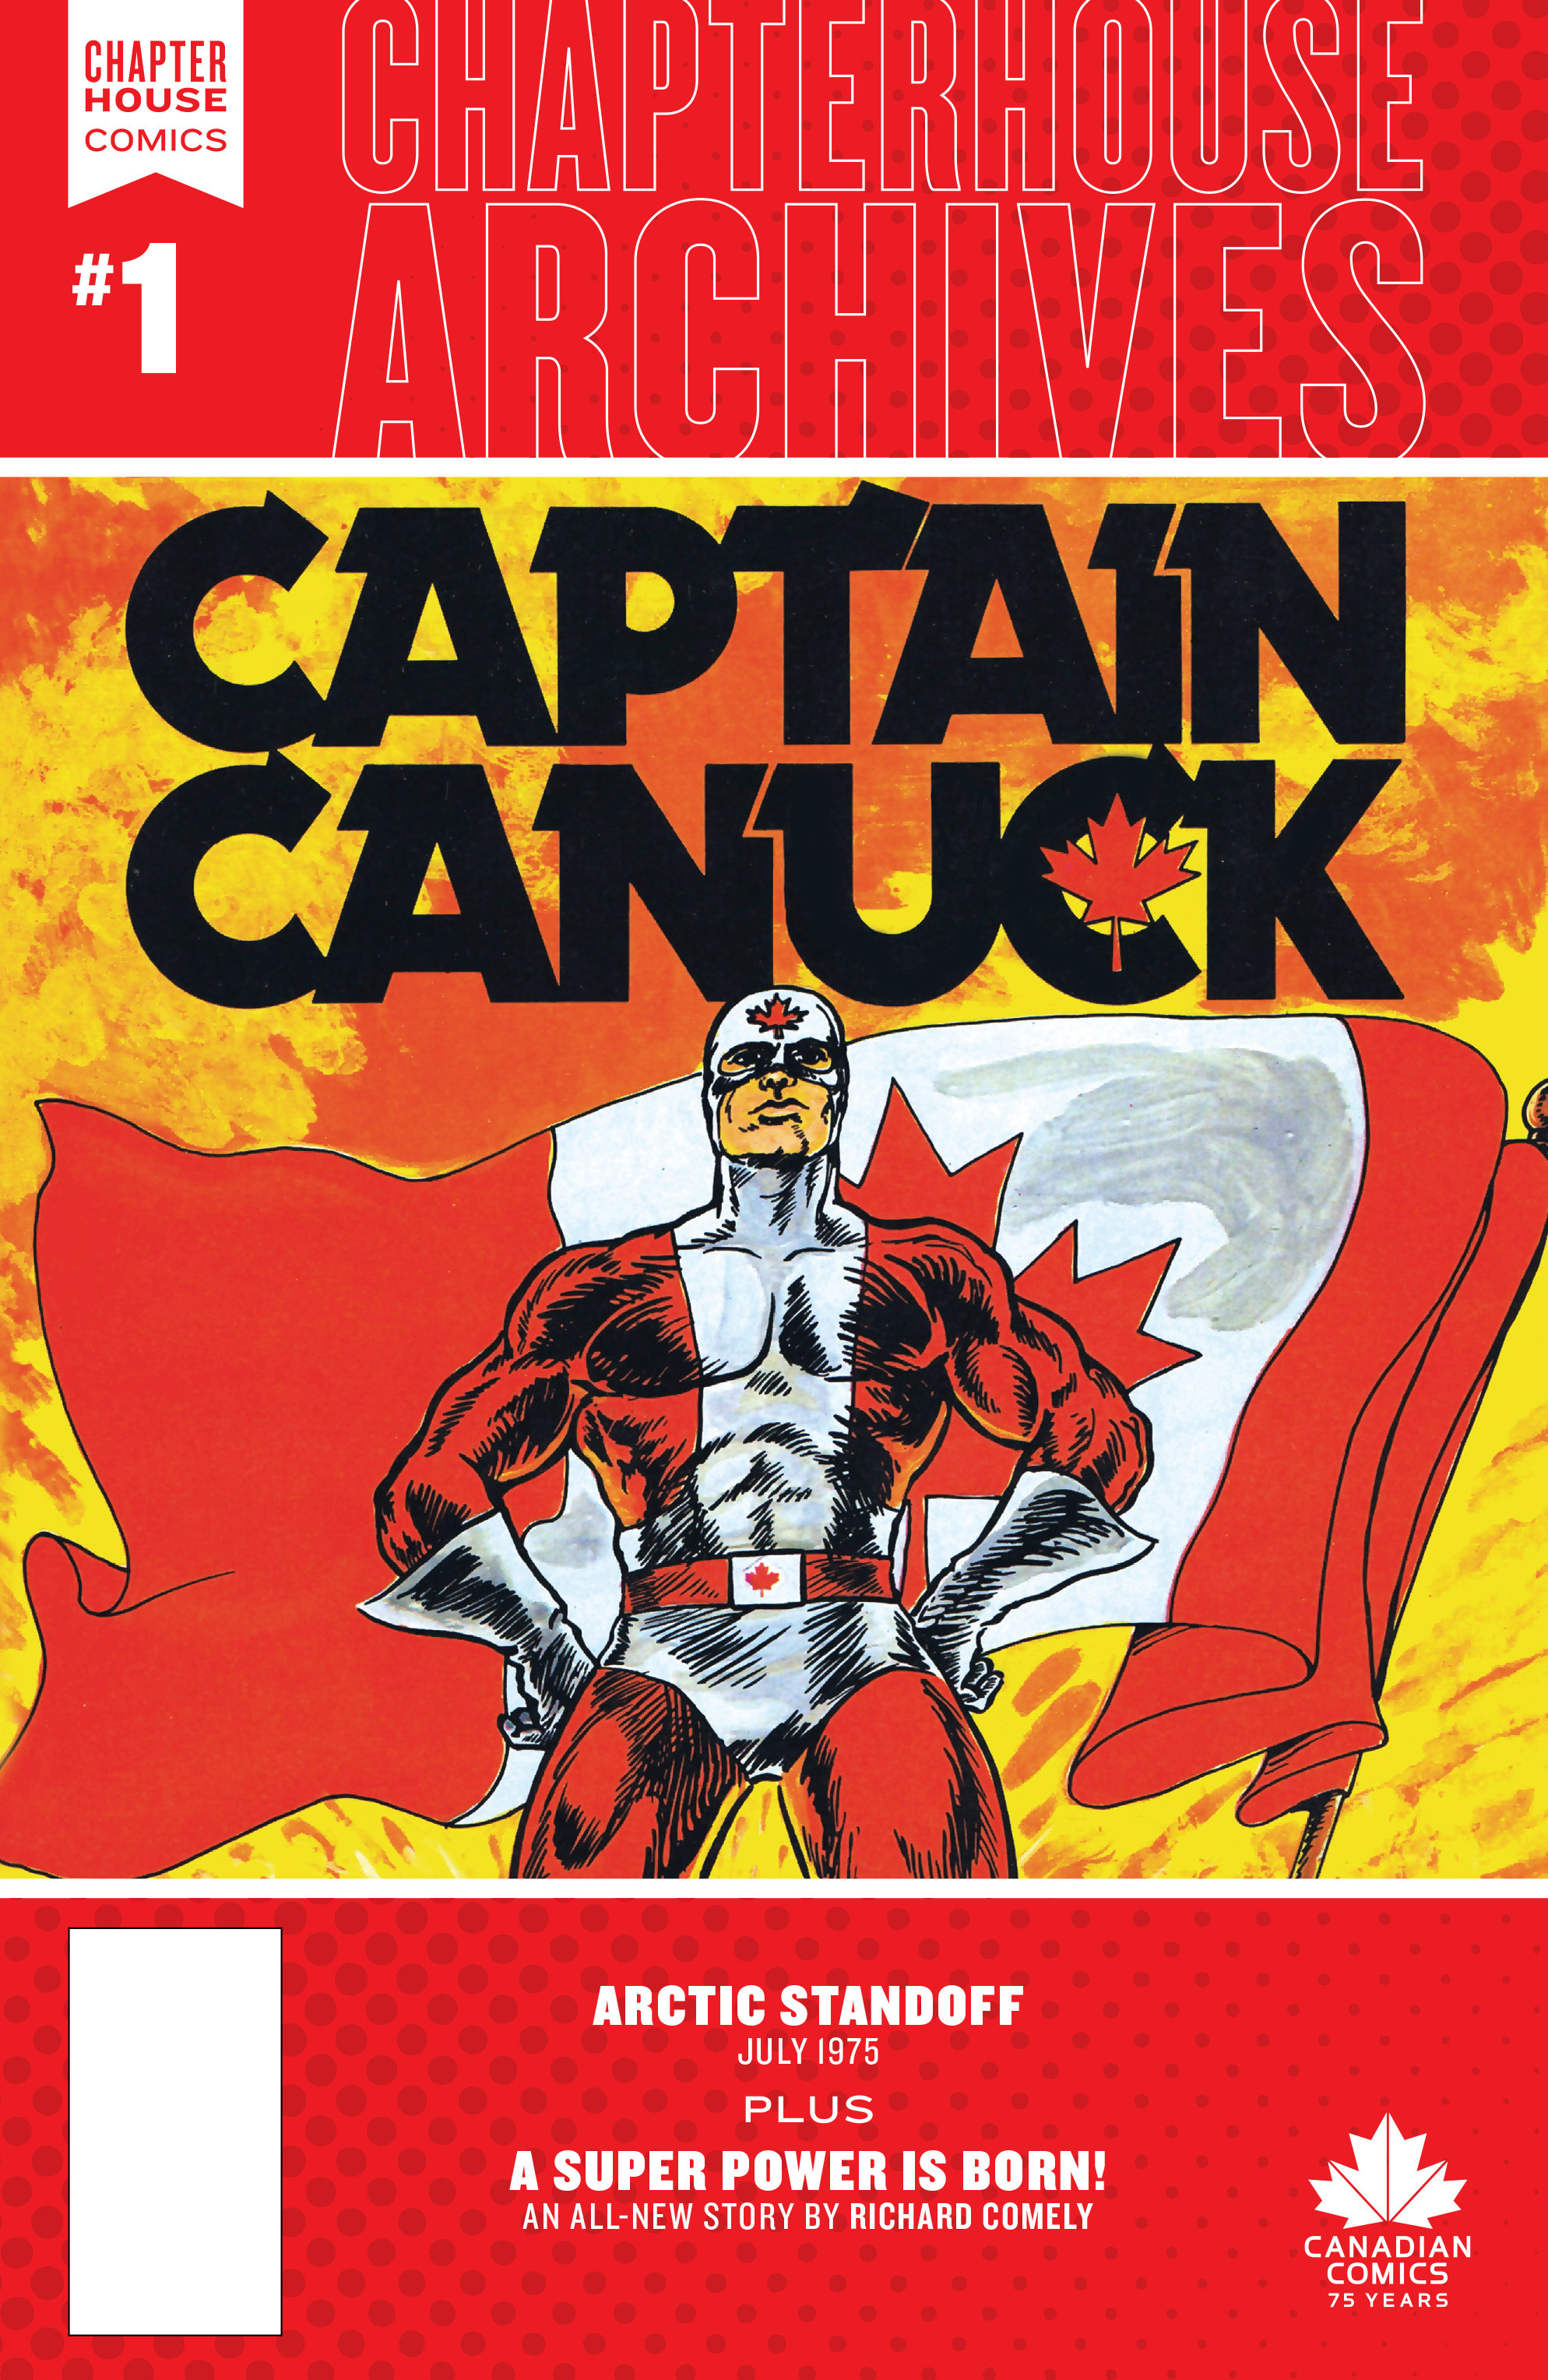 Read online Chapterhouse Archives: Captain Canuck comic -  Issue #1 - 1